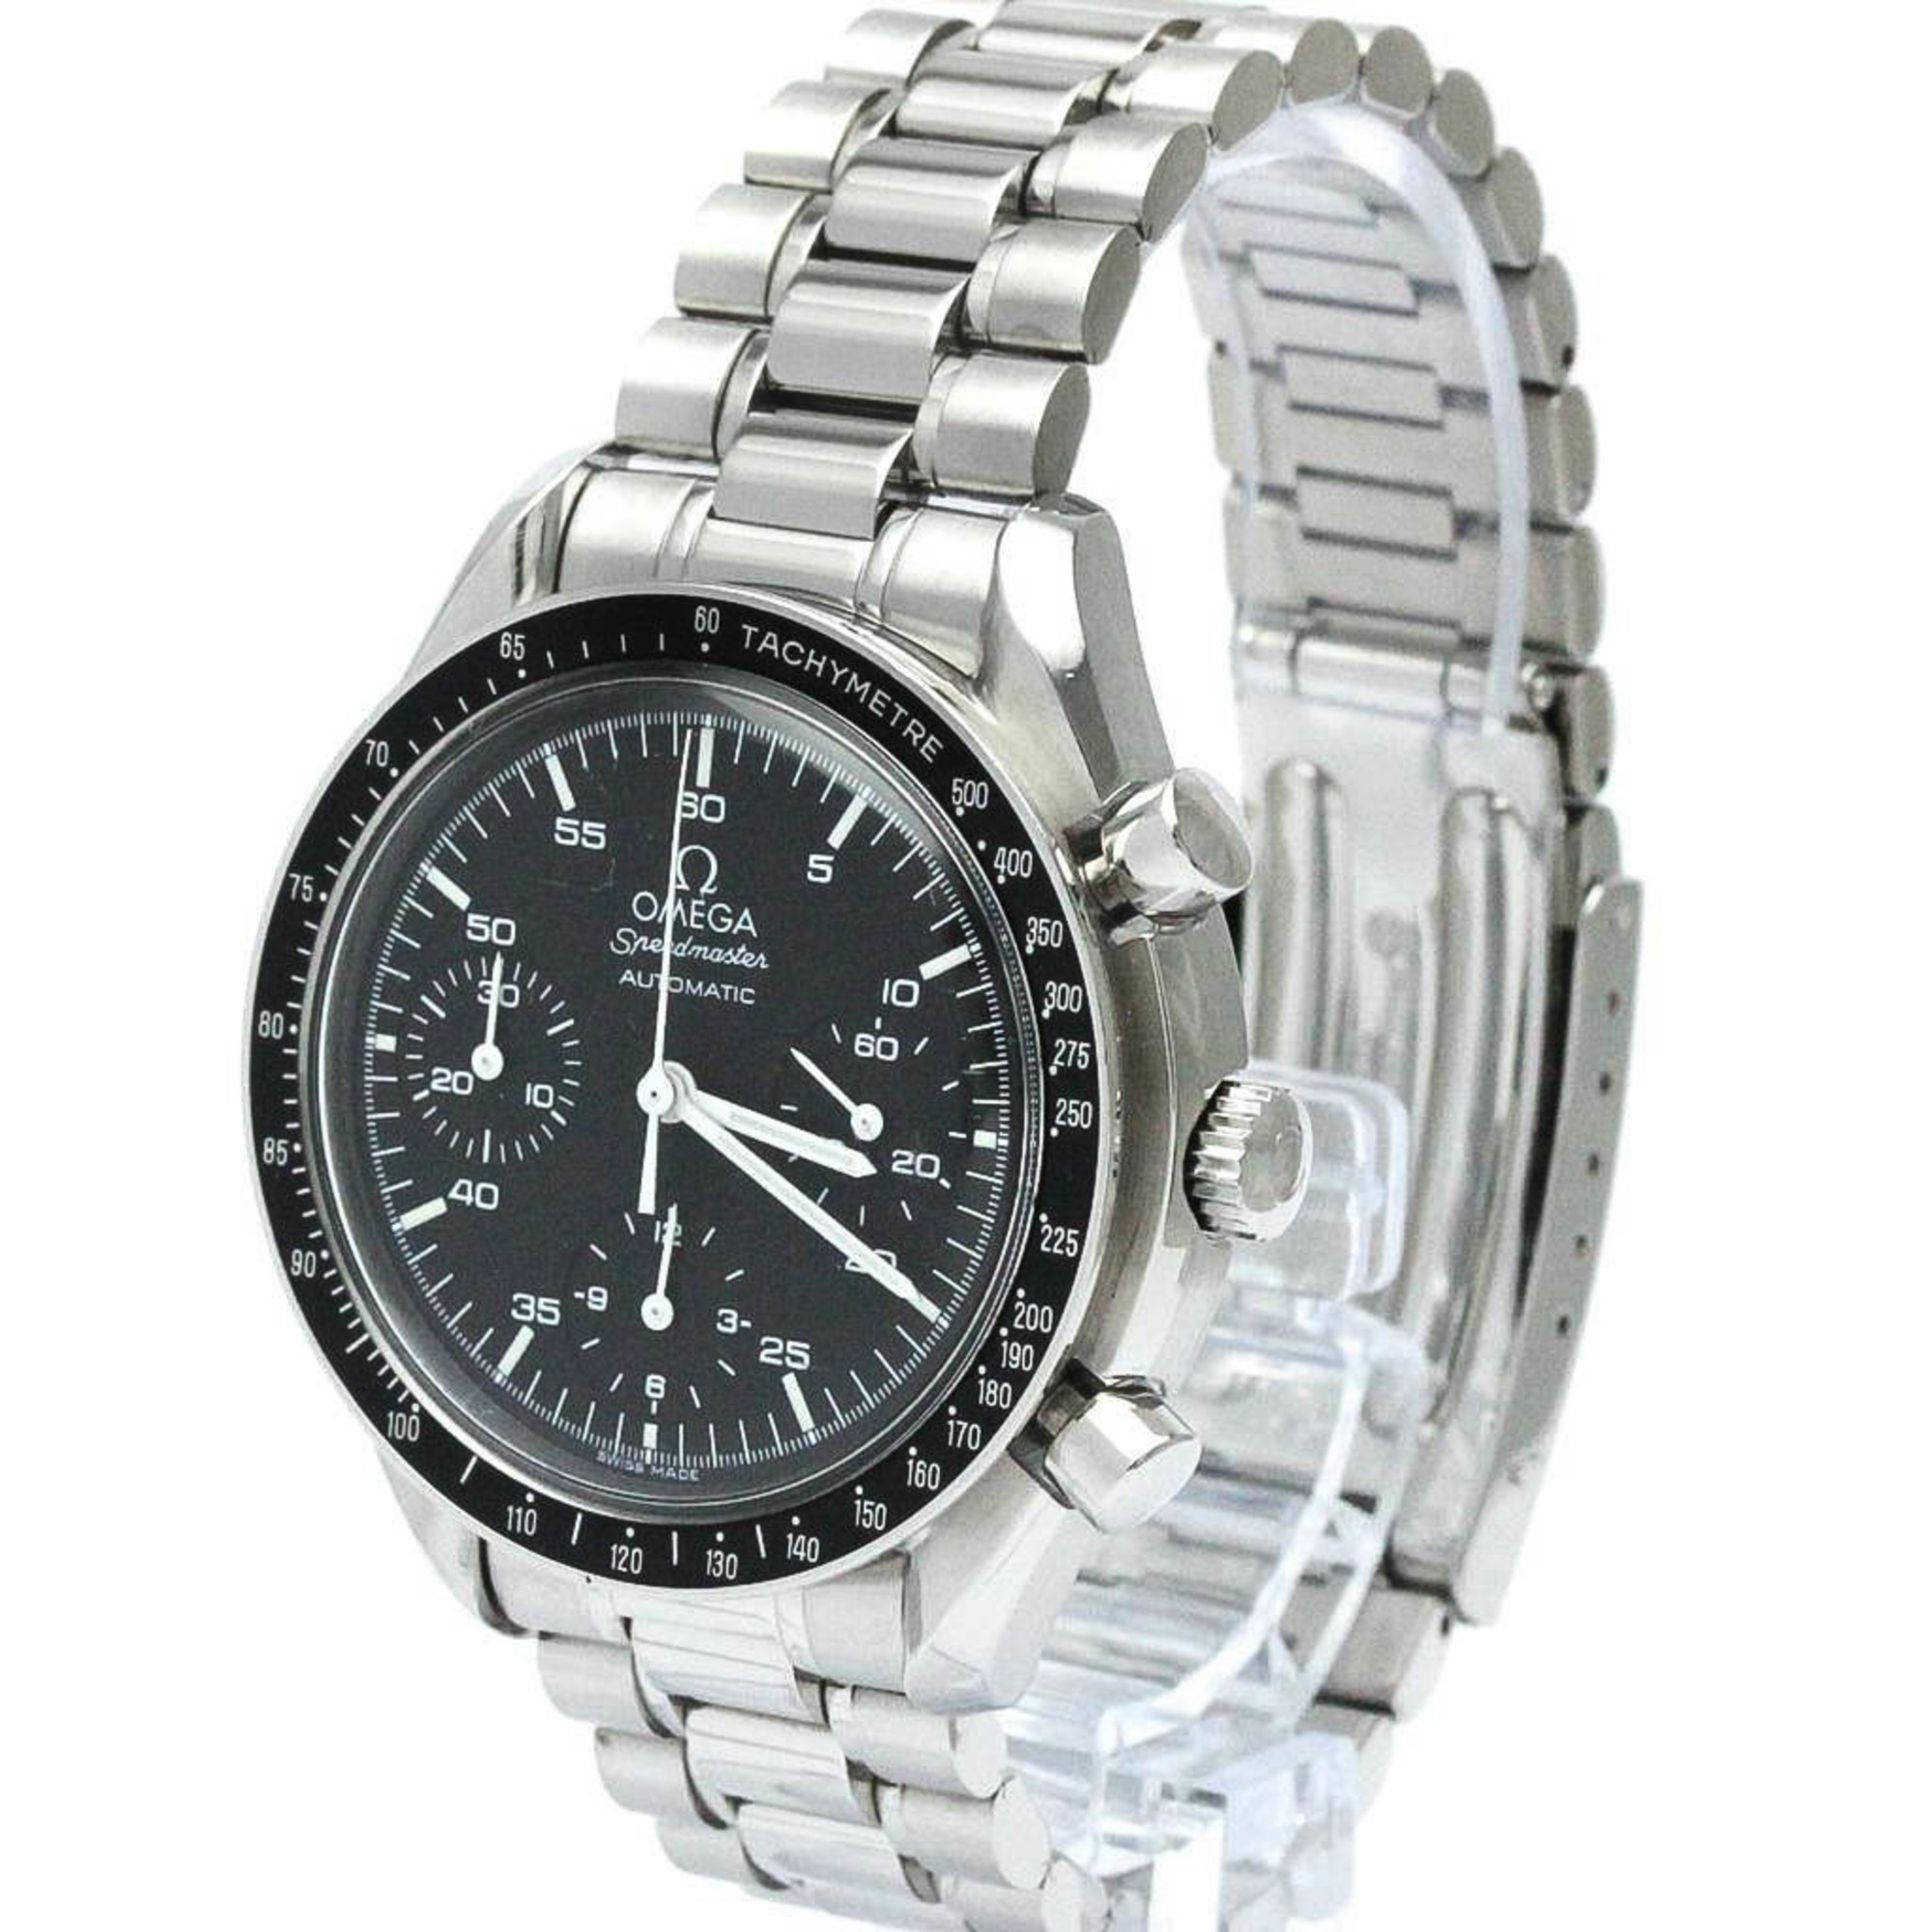 Polished OMEGA Speedmaster Automatic Steel Mens Watch 3510.50 BF567360